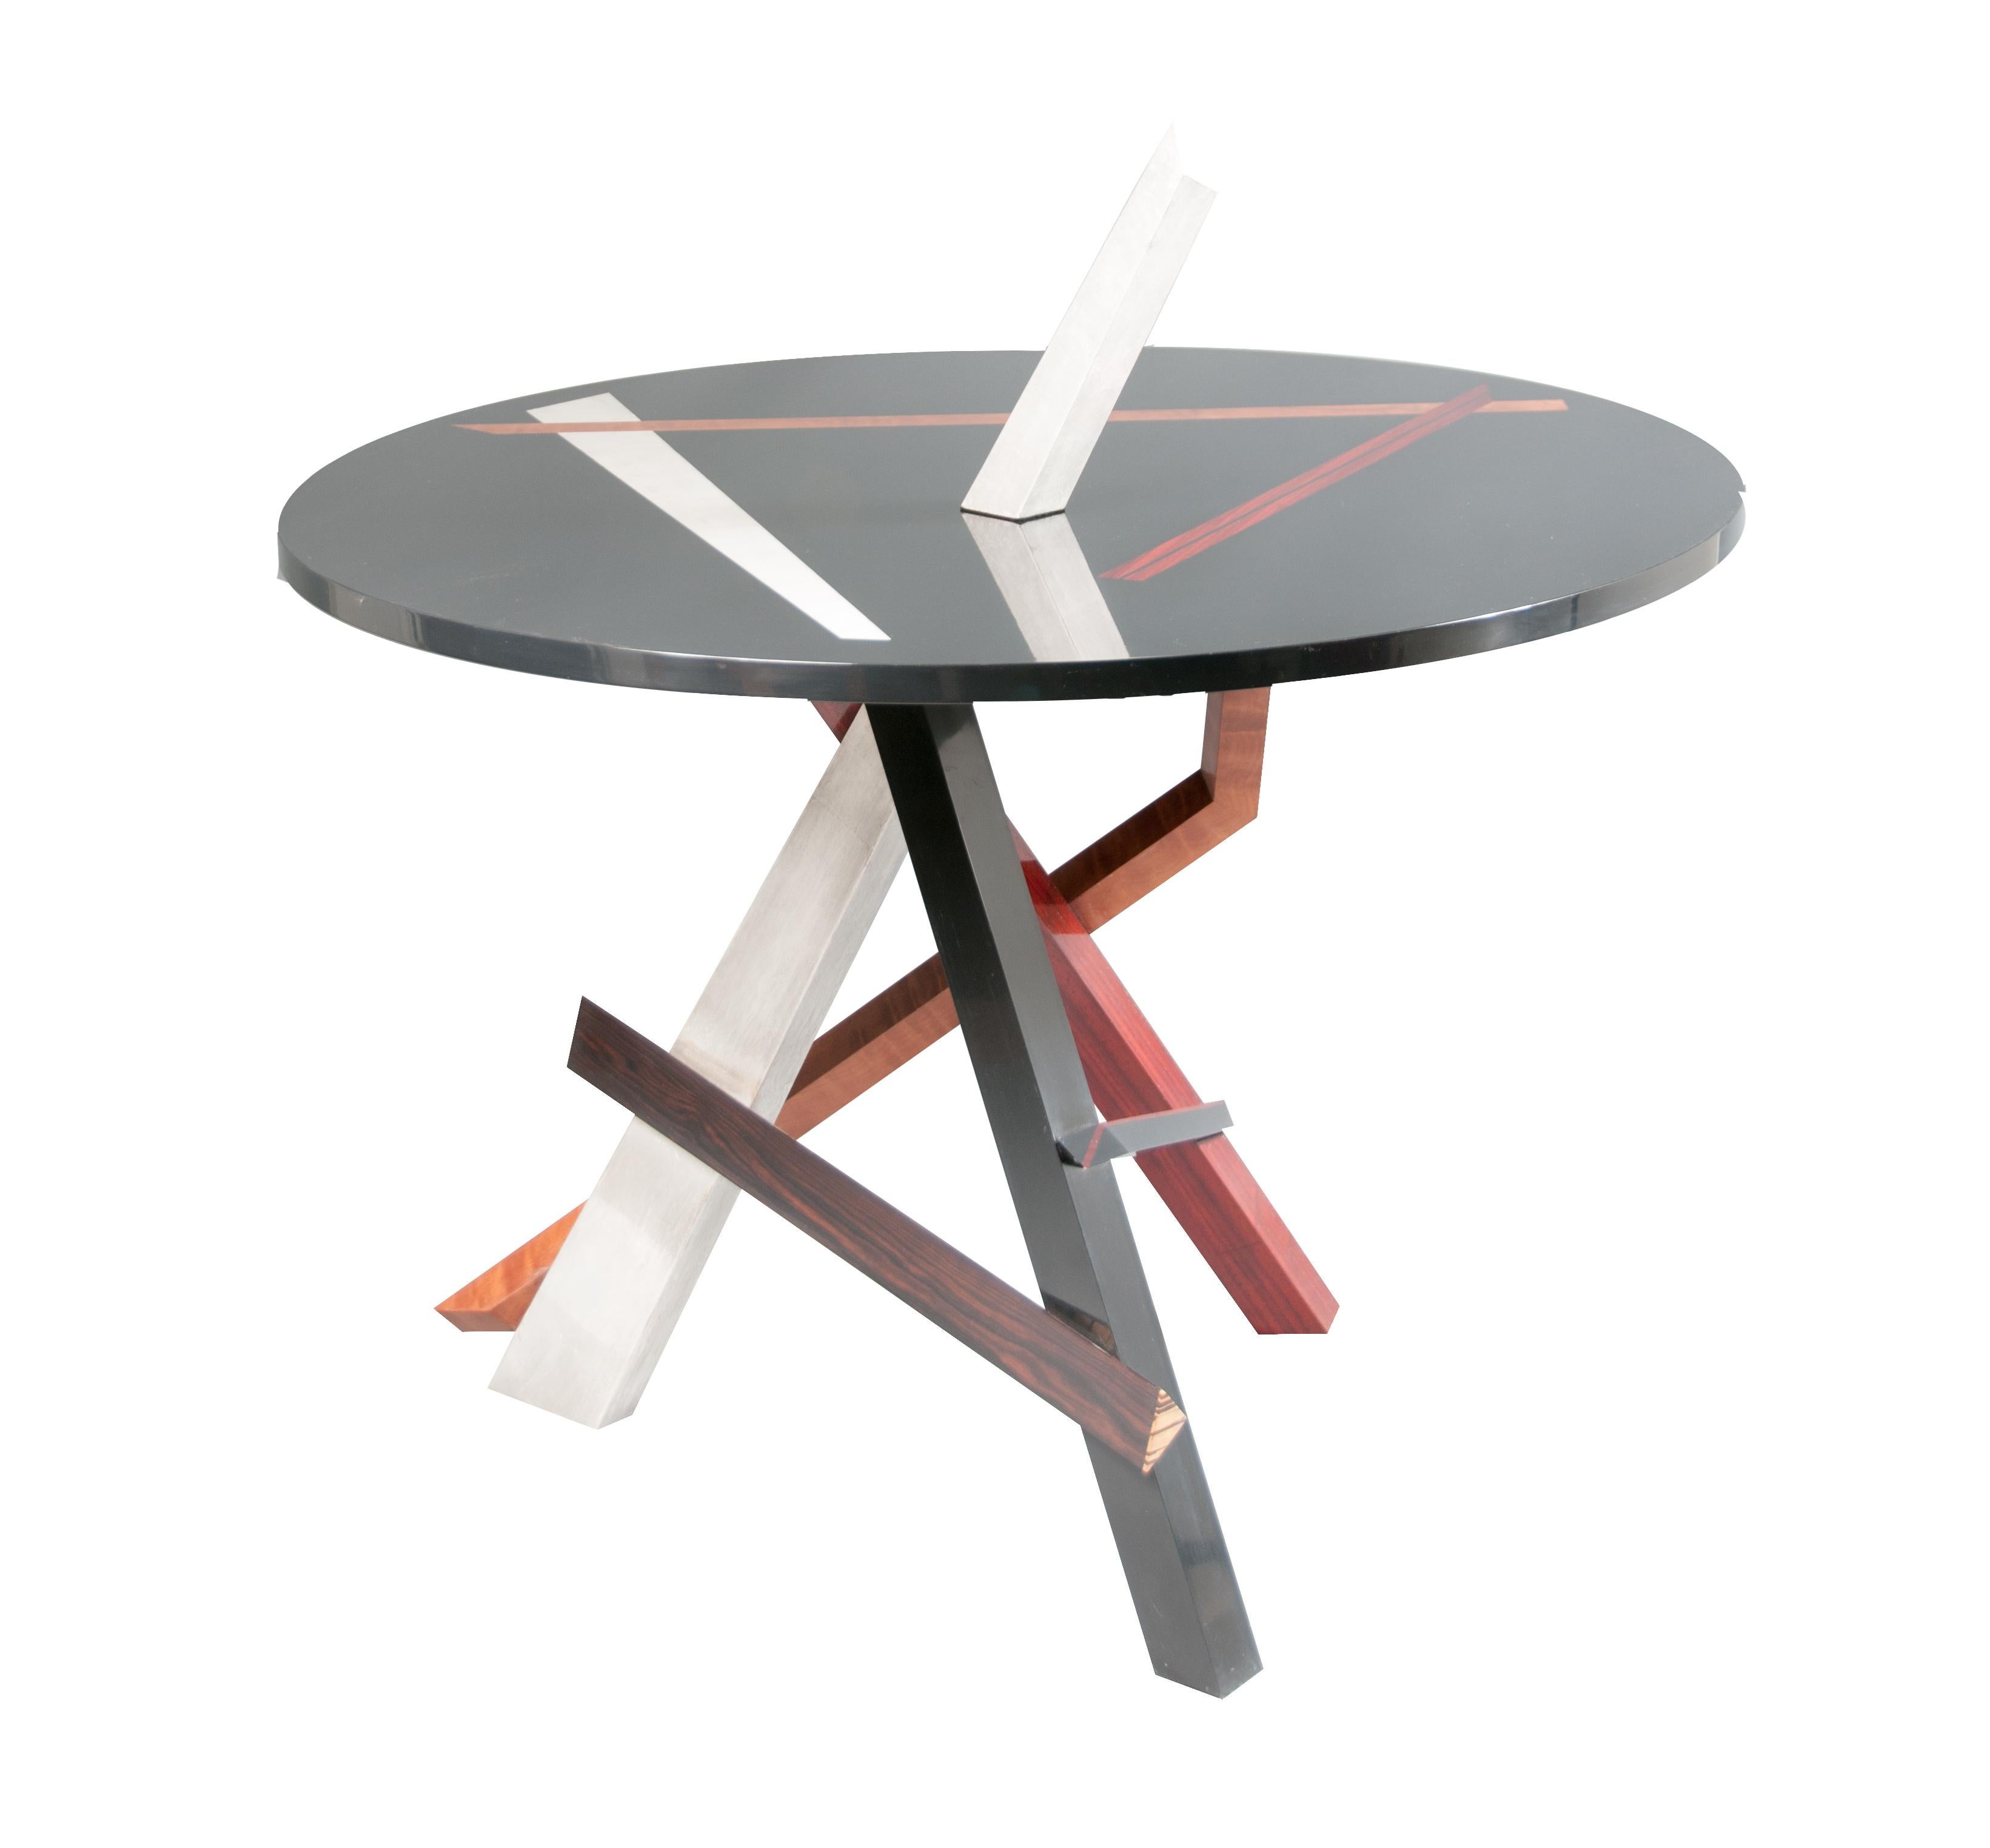 Title: “Convergence”

About The Piece:  This one of a kind signed and titled functional piece of art was designed to function as a center table while creating an Abstract Expressionistic sculpture reminiscent of the works of Mark di Suvero and David